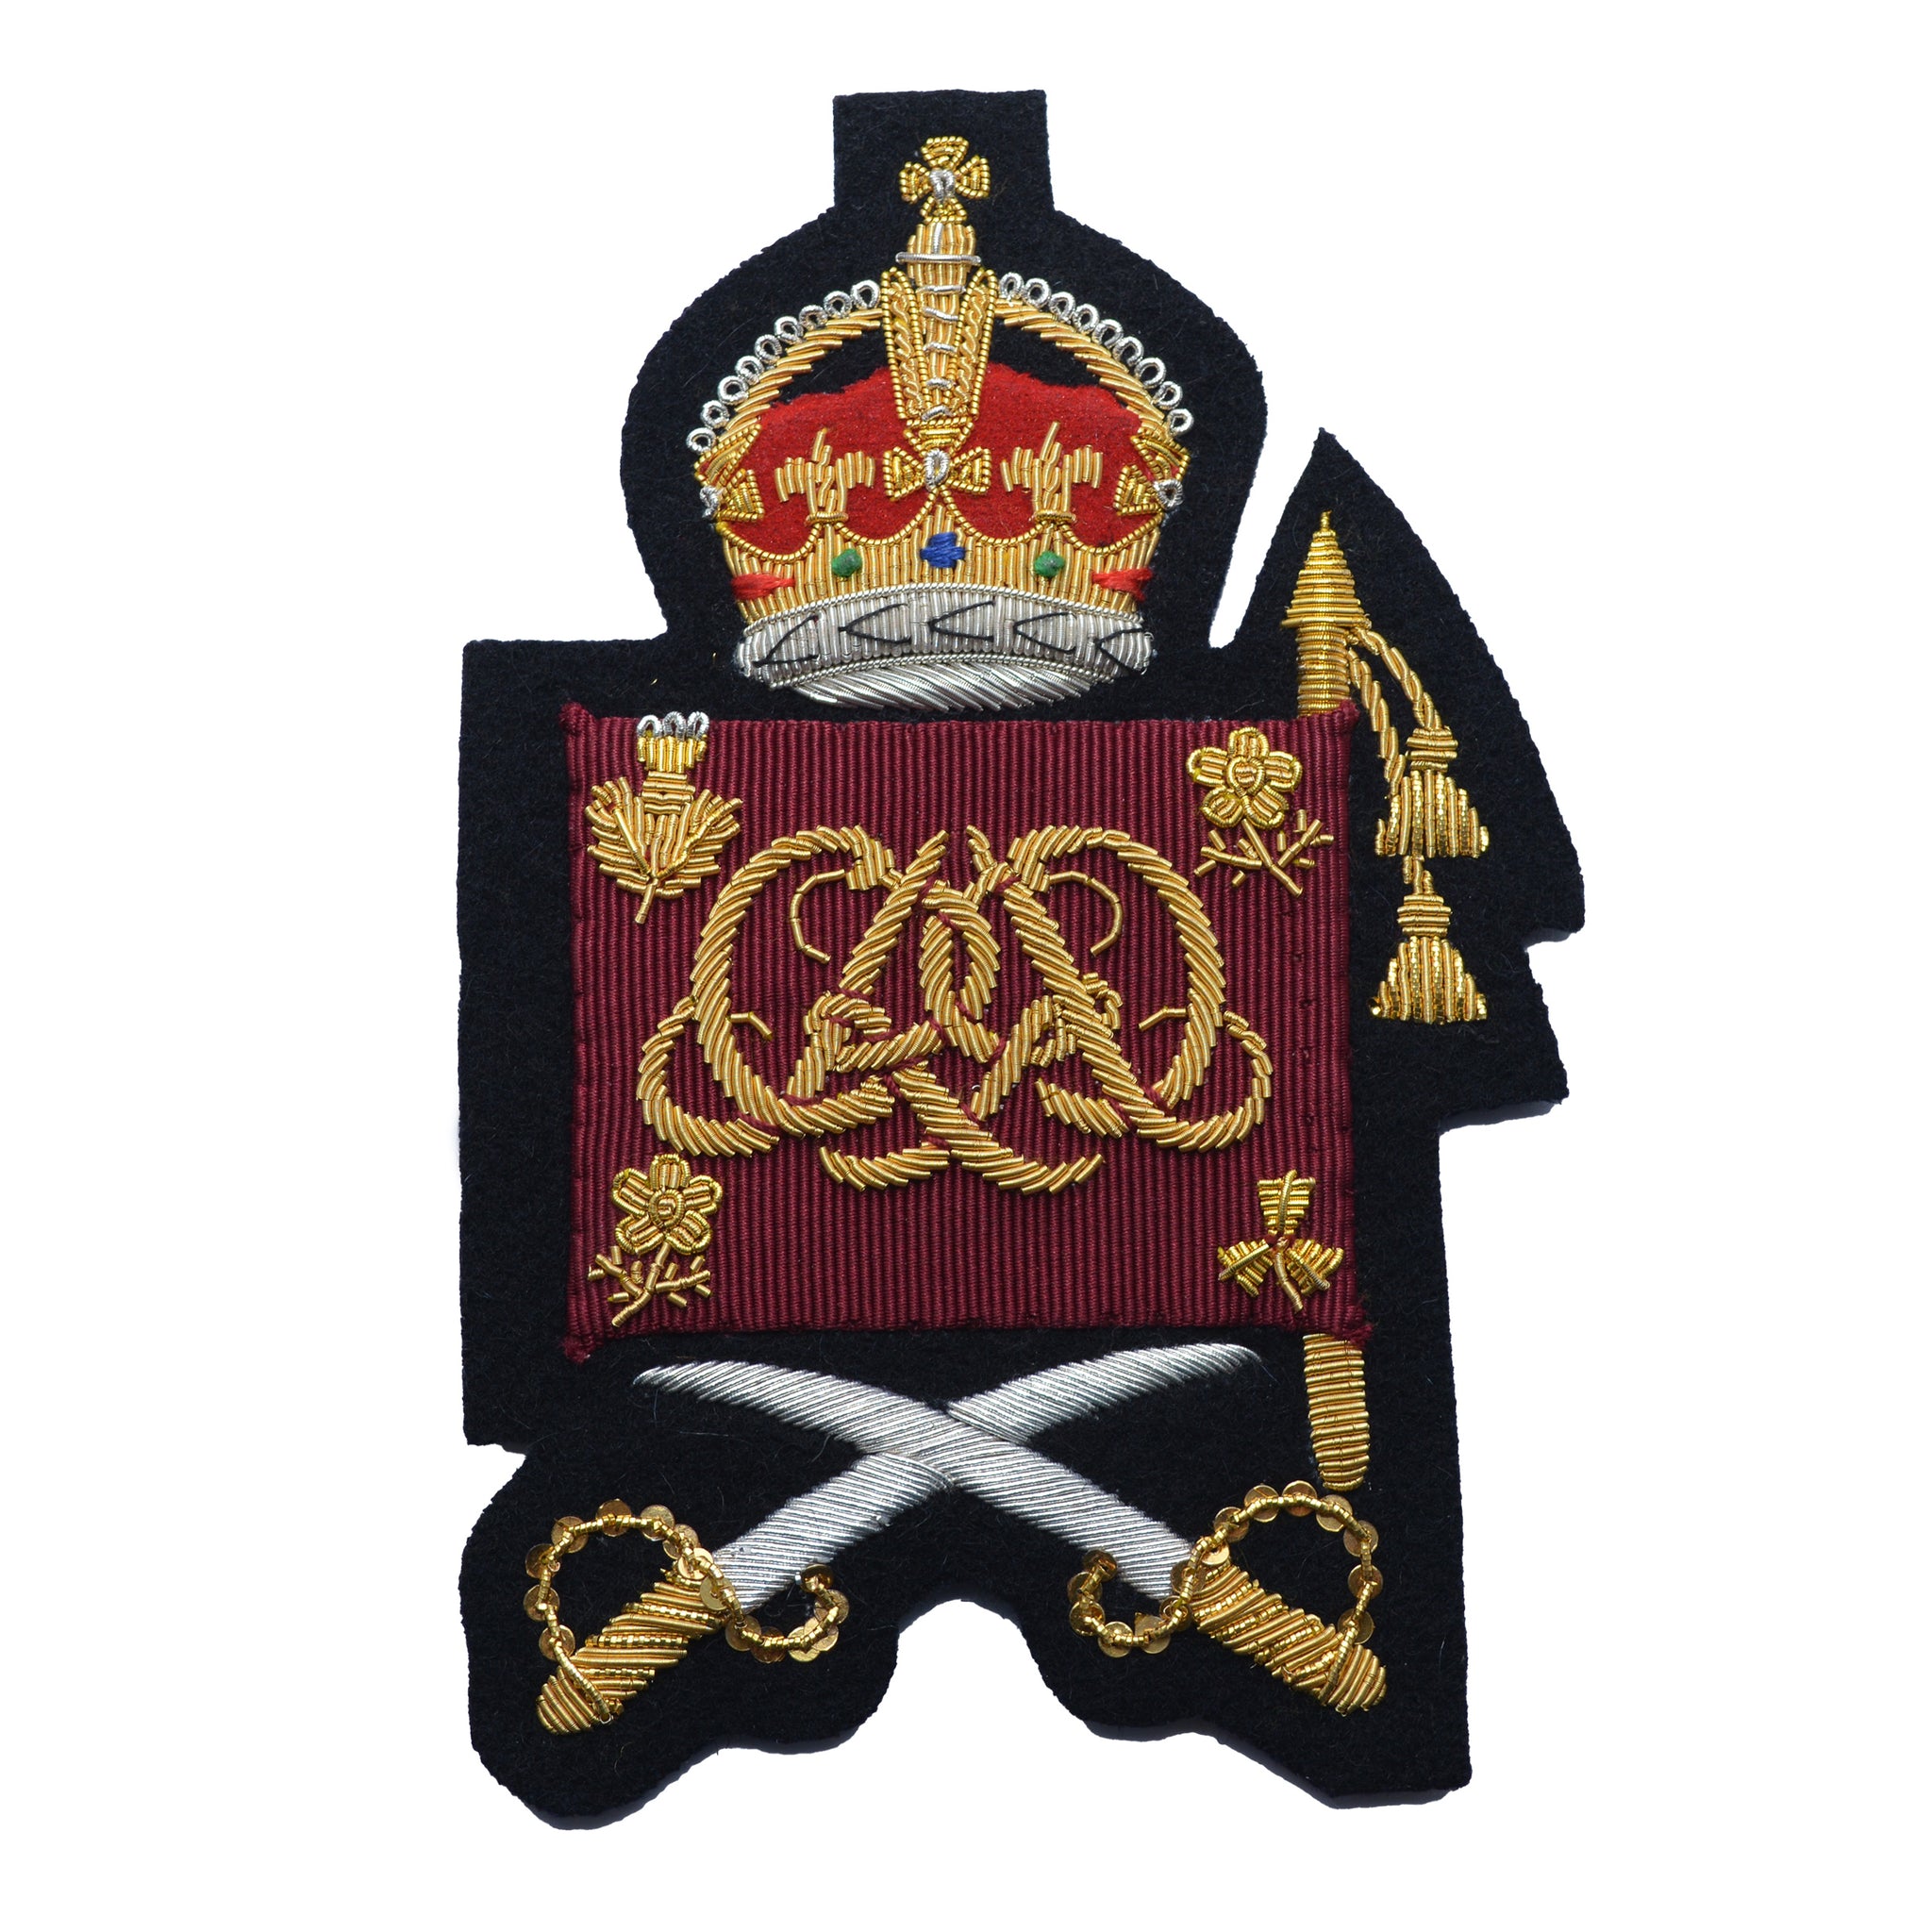 (King's Crown) Colour Sergeants and Company Quartermaster Sergeants Rank Household Division Grenadier Guards British Army Badge